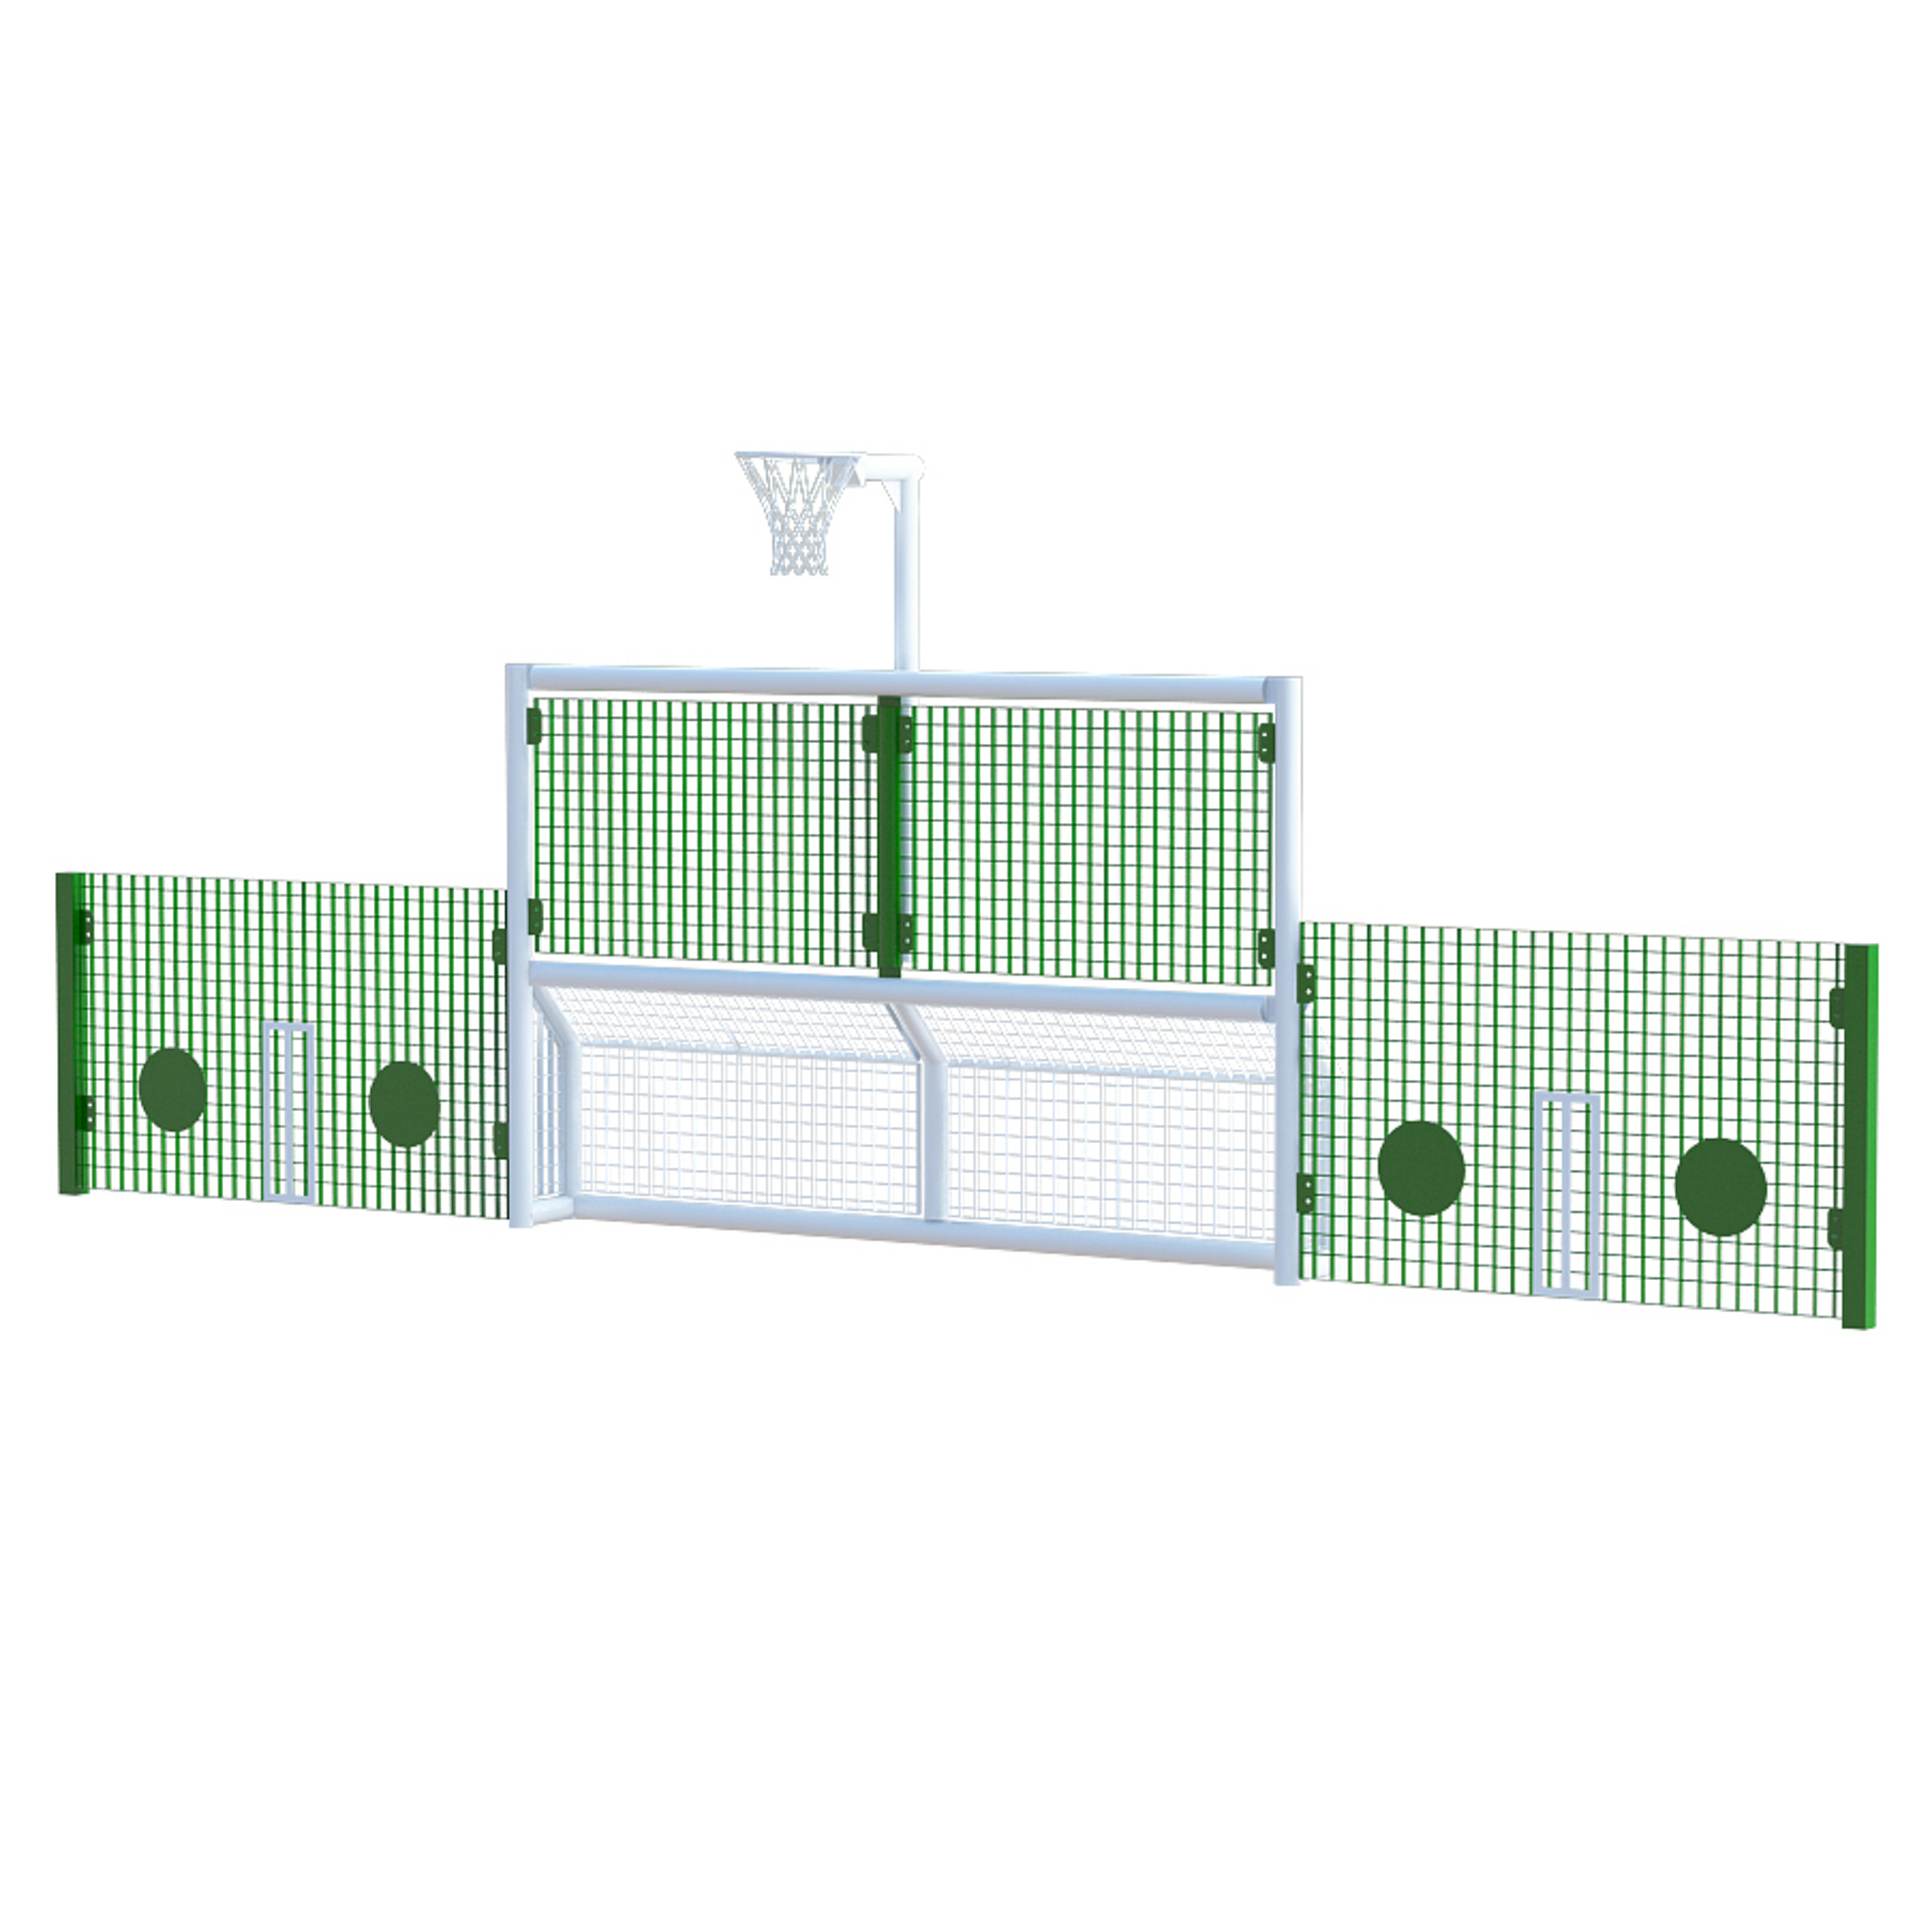 Primary Low Sides Nball Wht Frame Green